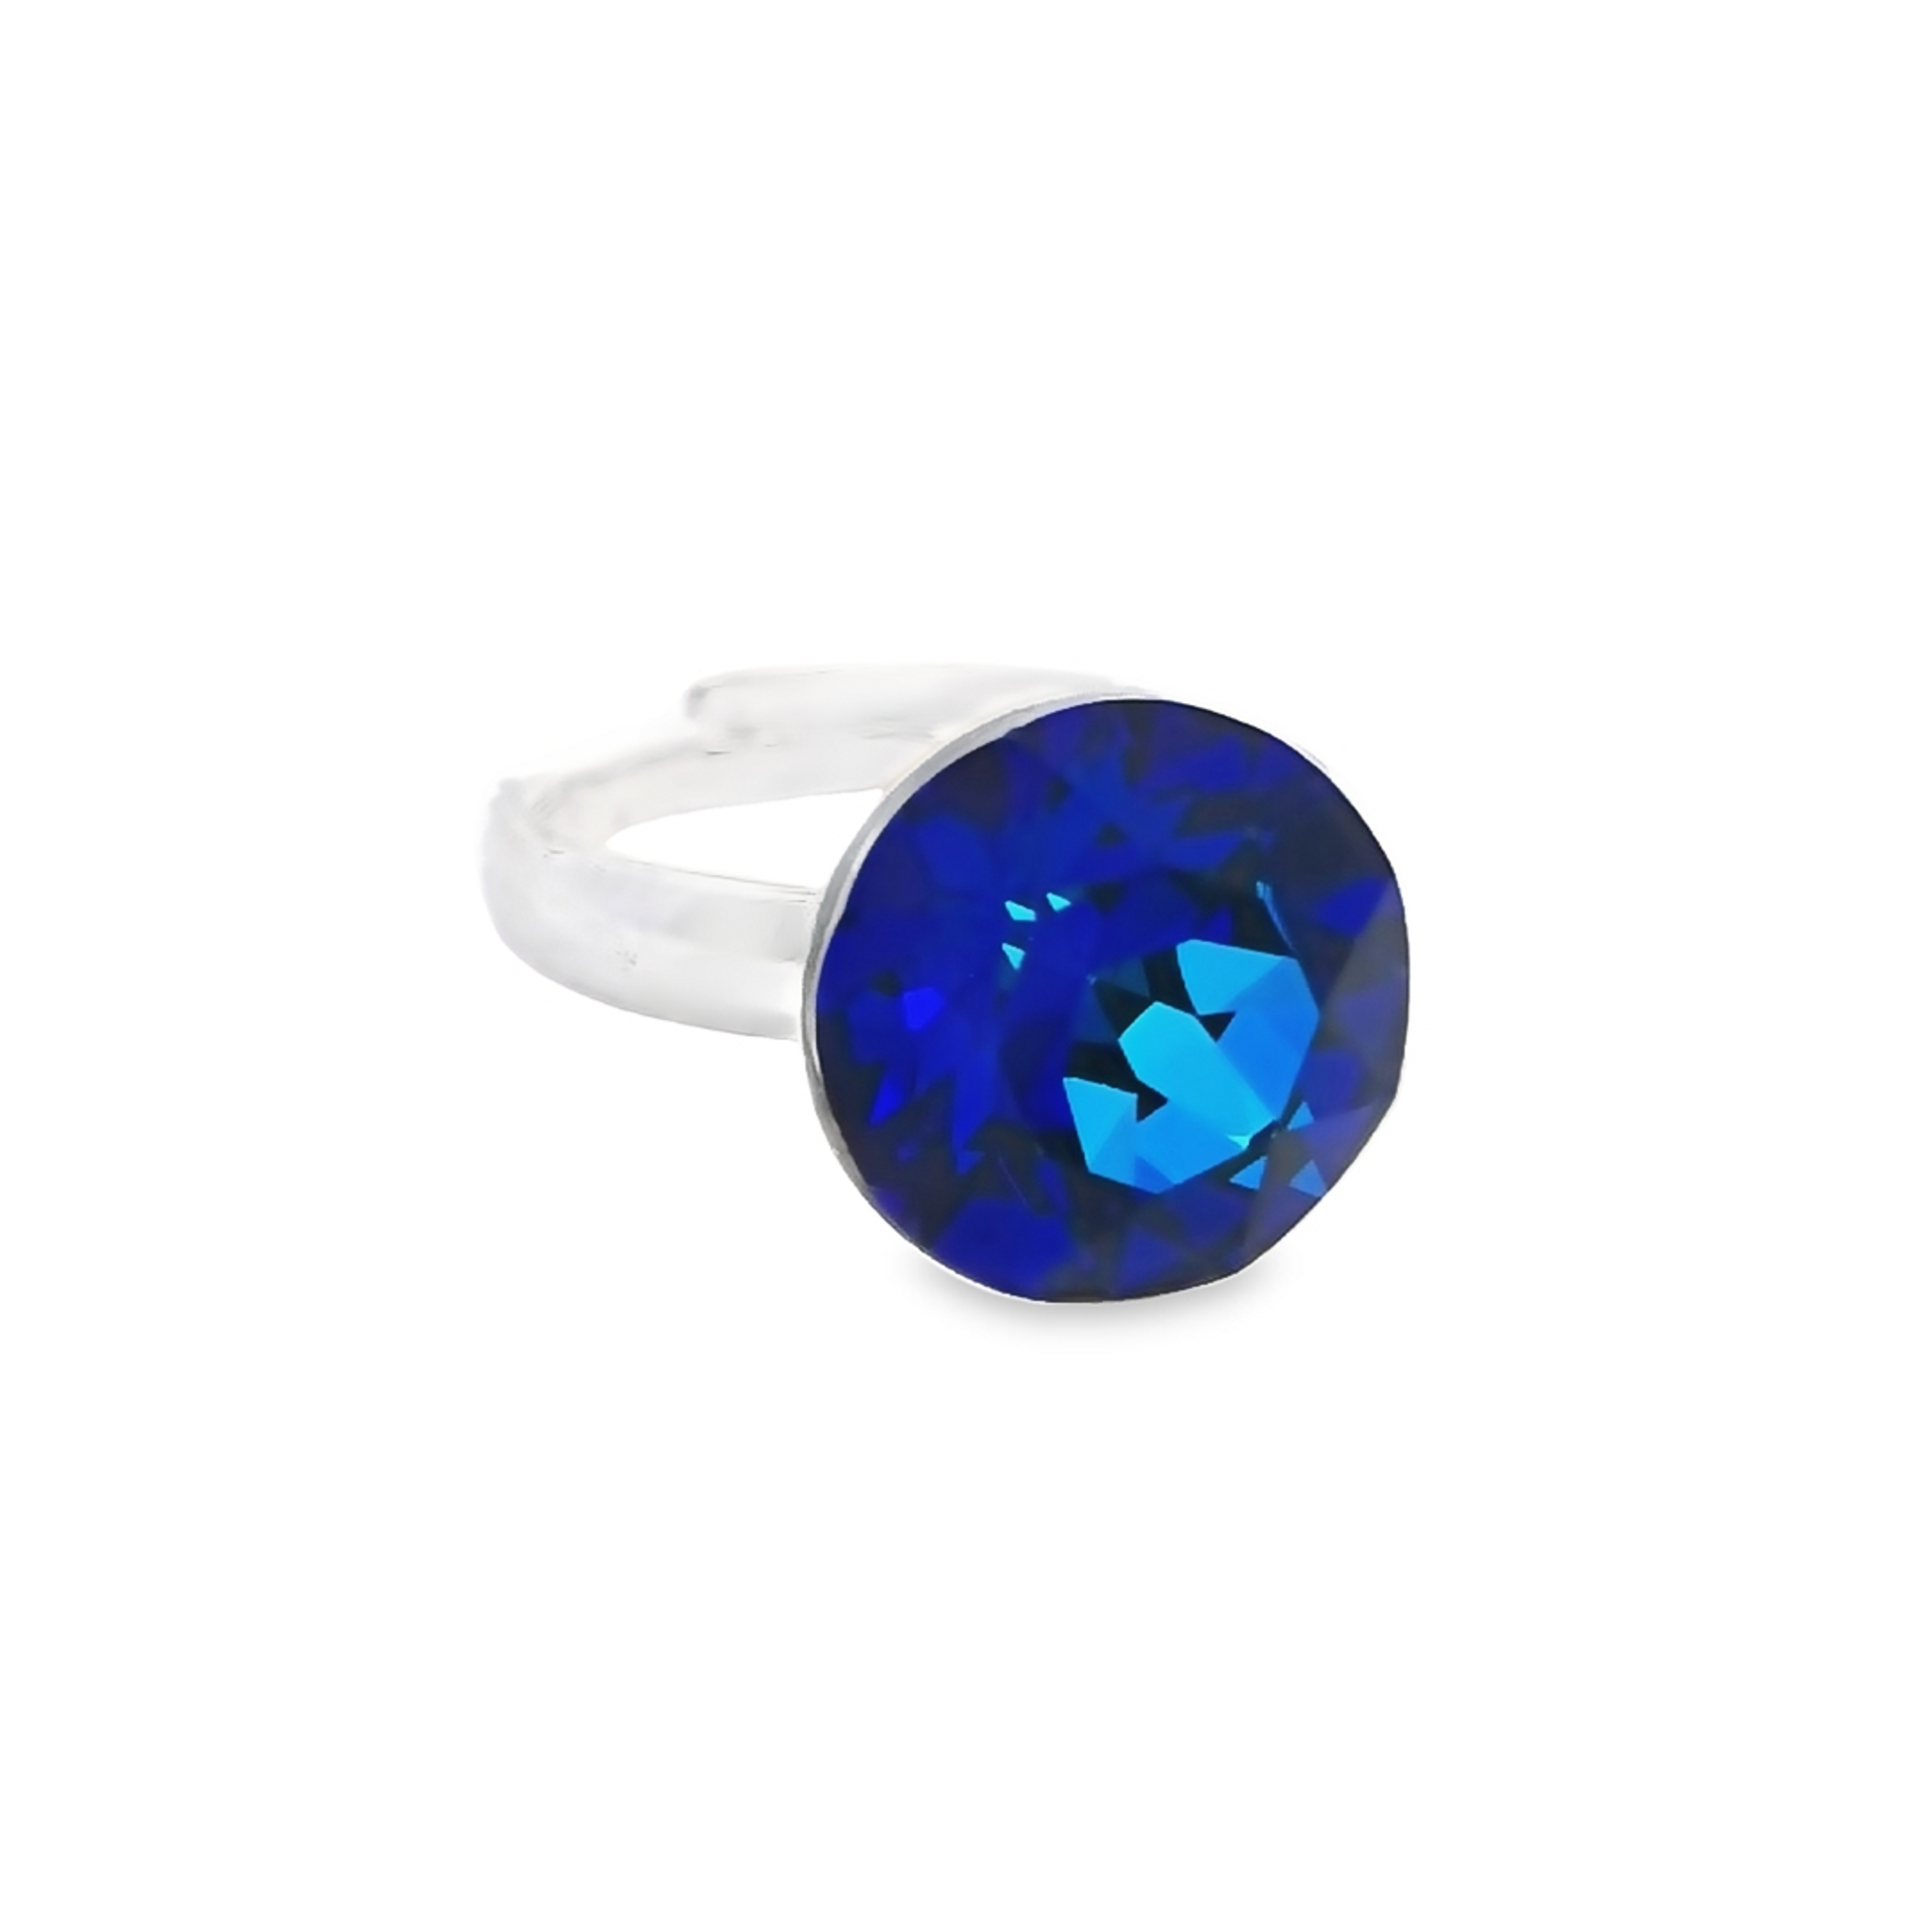 Bermuda Breeze - Sterling Silver Ring with Ocean Blue Chaton Crystal, Front View - Magpie Gems Ireland